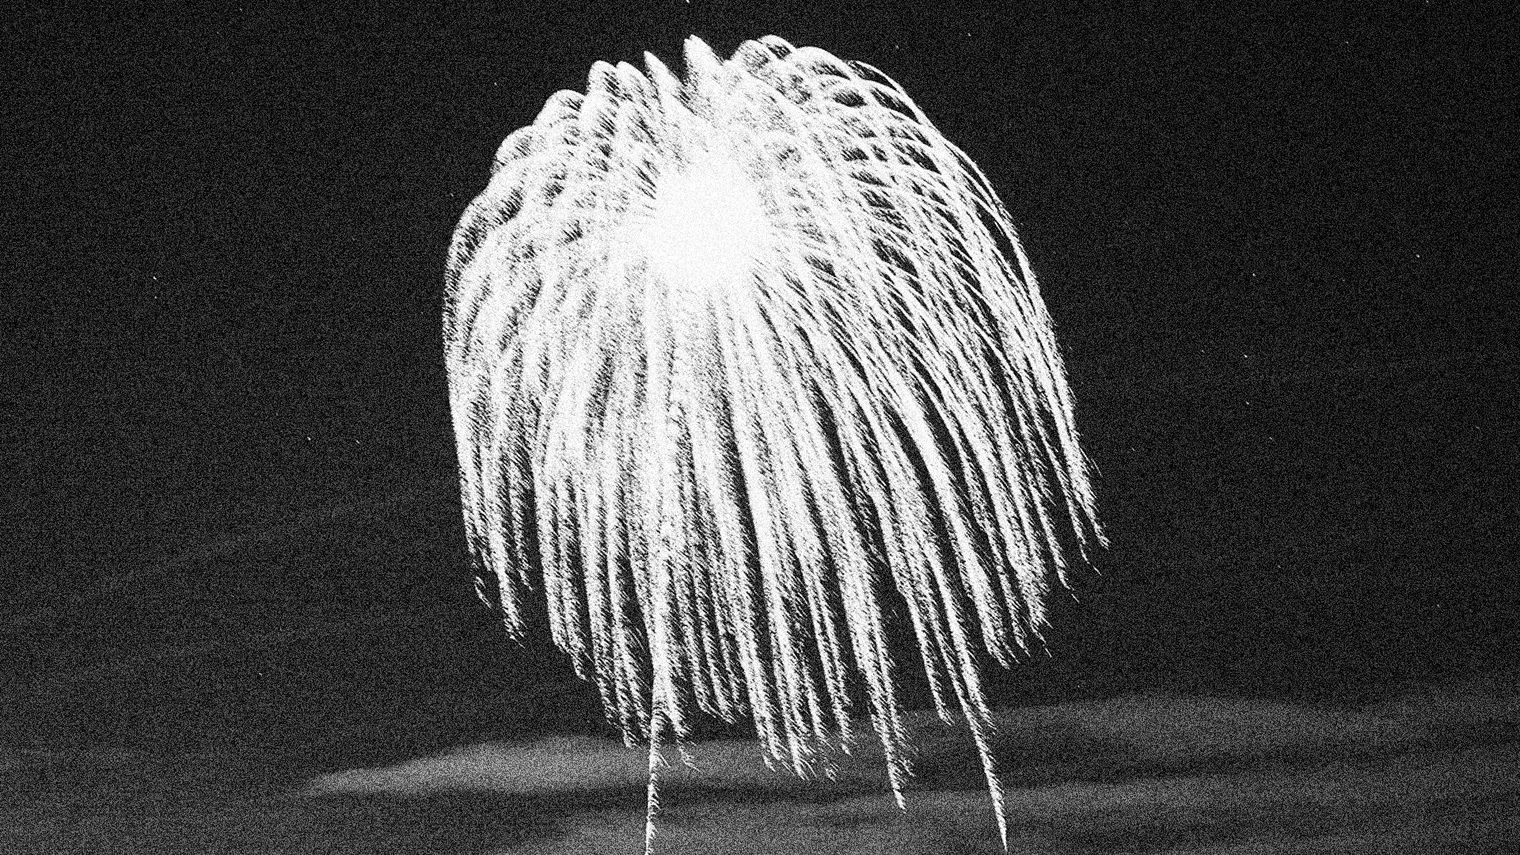 A bright firework exploding in the night sky.